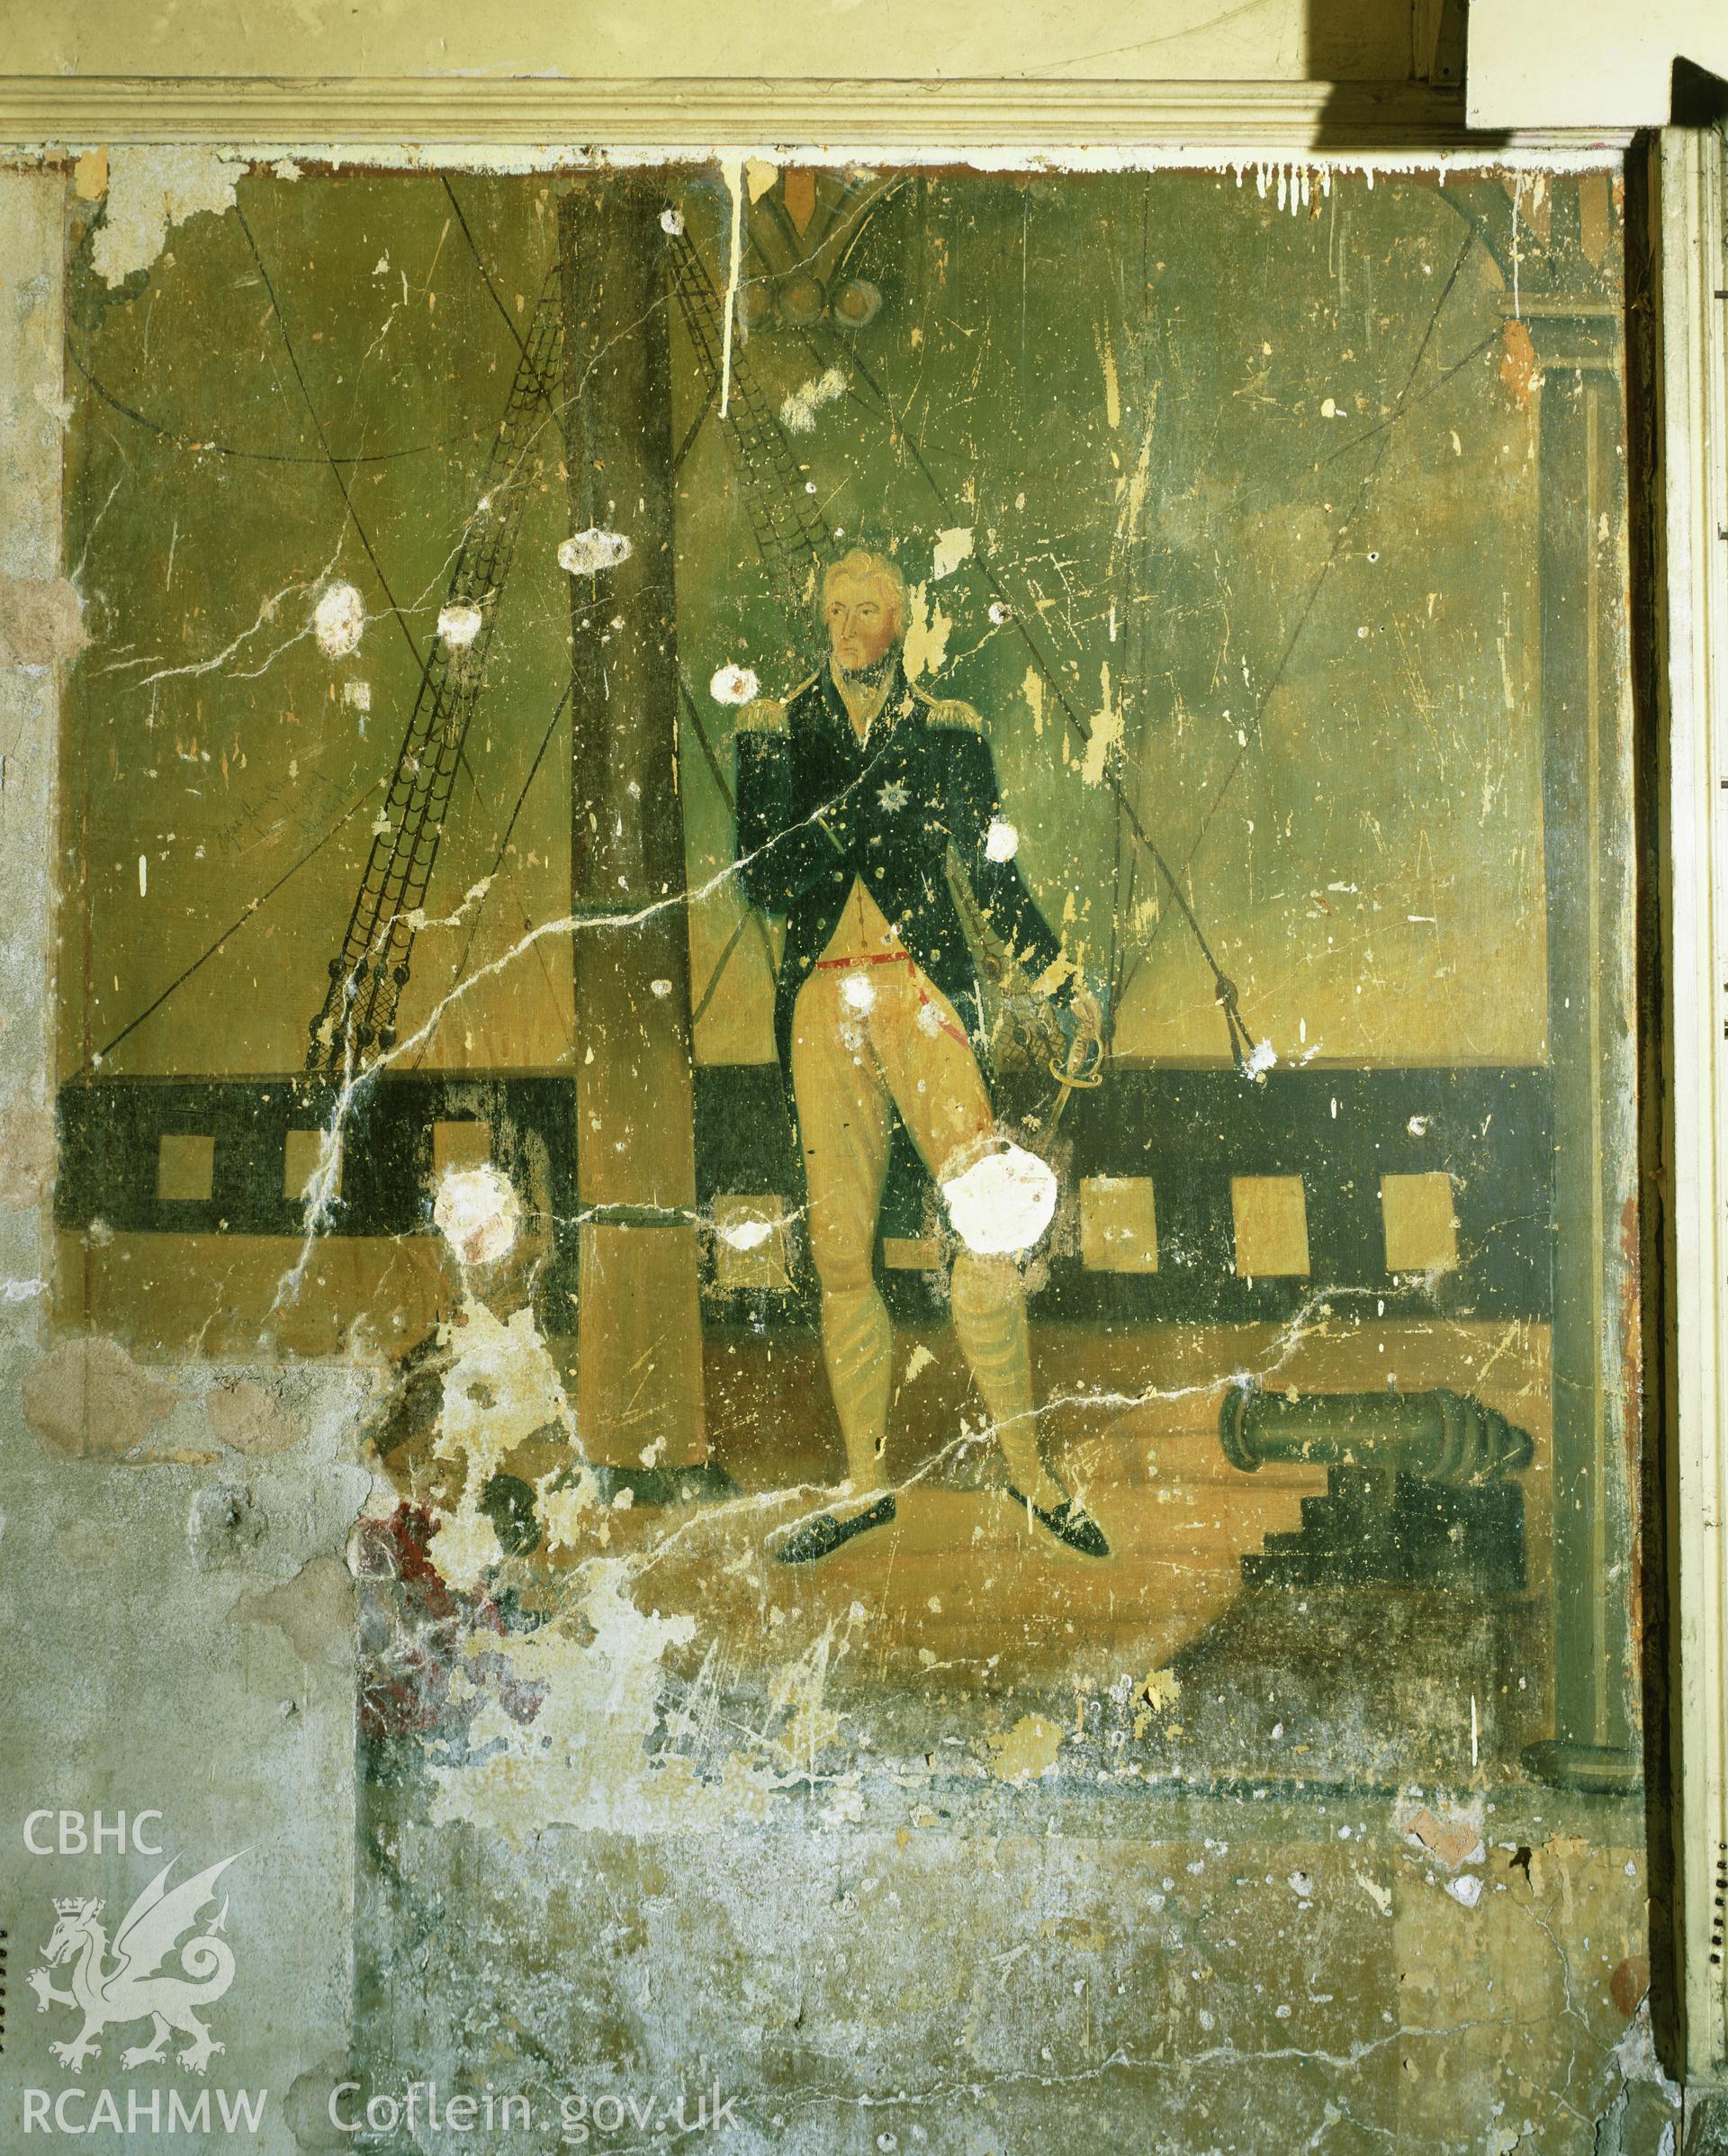 RCAHMW colour transparency showing naval officer wallpainting at Elwy Bank, St Asaph, photographed by Iain Wright, November 2003.